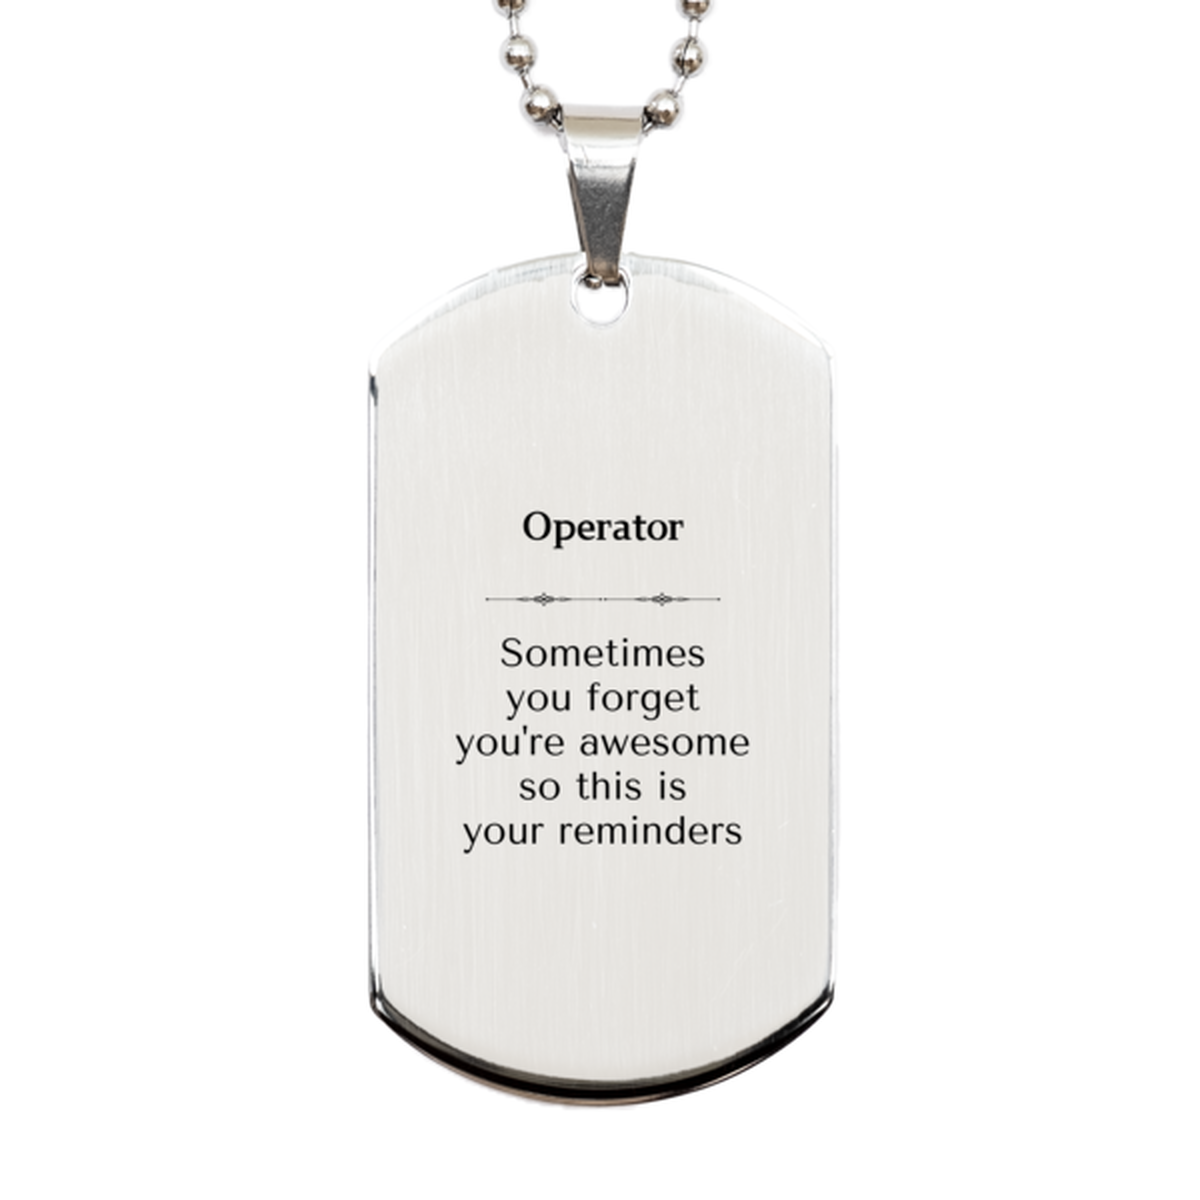 Sentimental Operator Silver Dog Tag, Operator Sometimes you forget you're awesome so this is your reminders, Graduation Christmas Birthday Gifts for Operator, Men, Women, Coworkers